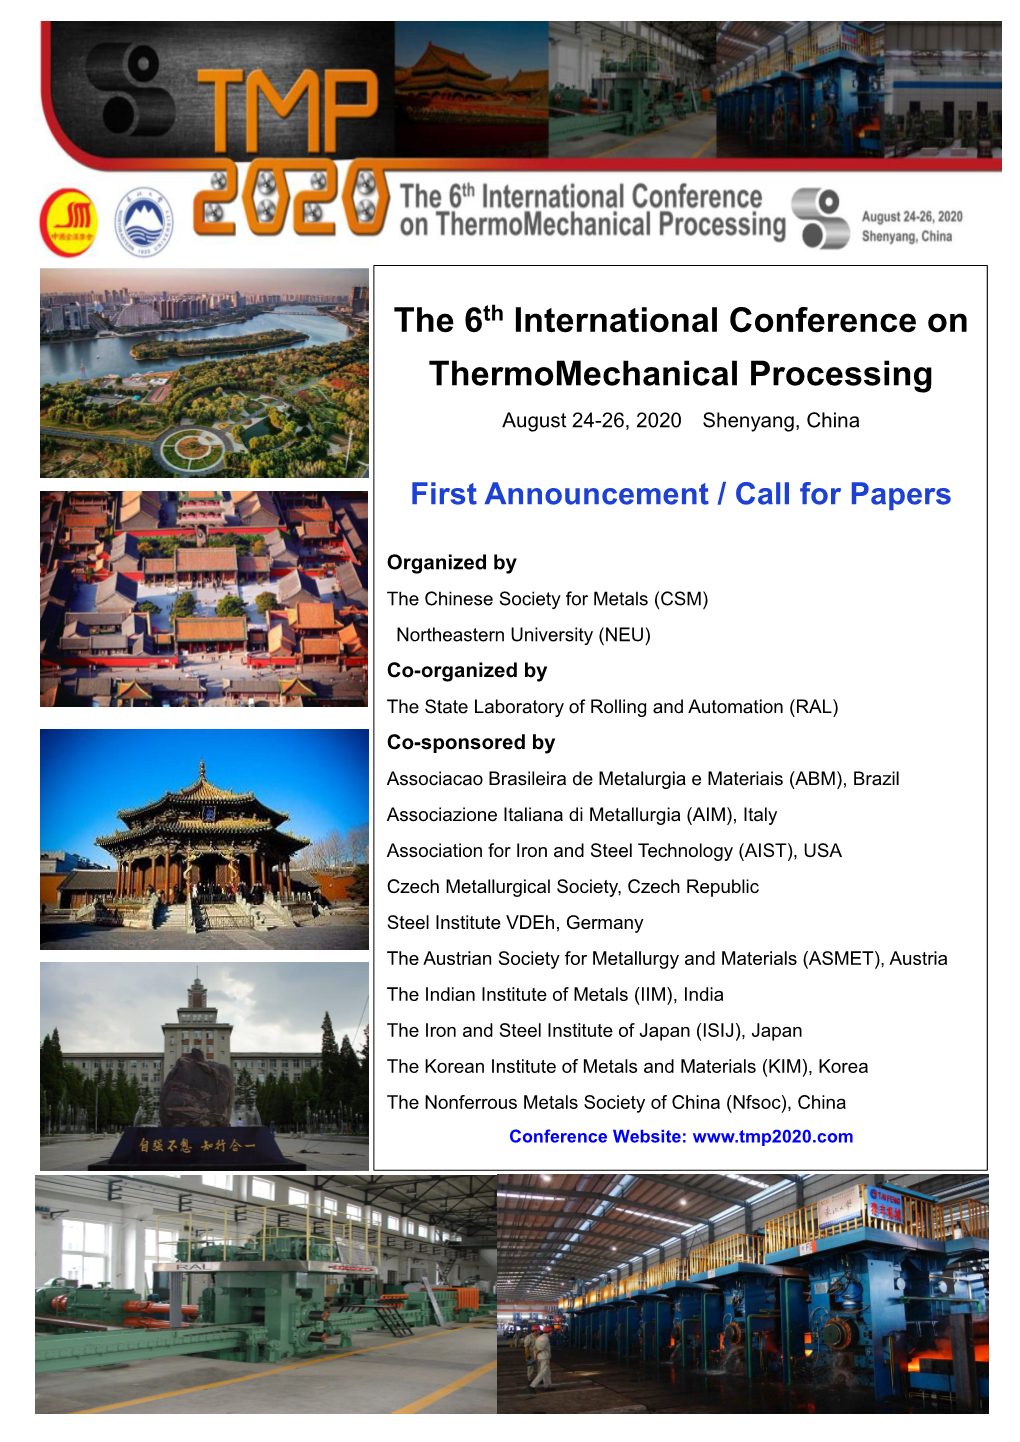 The 6Th International Conference on Thermomechanical Processing August 24-26, 2020 Shenyang, China